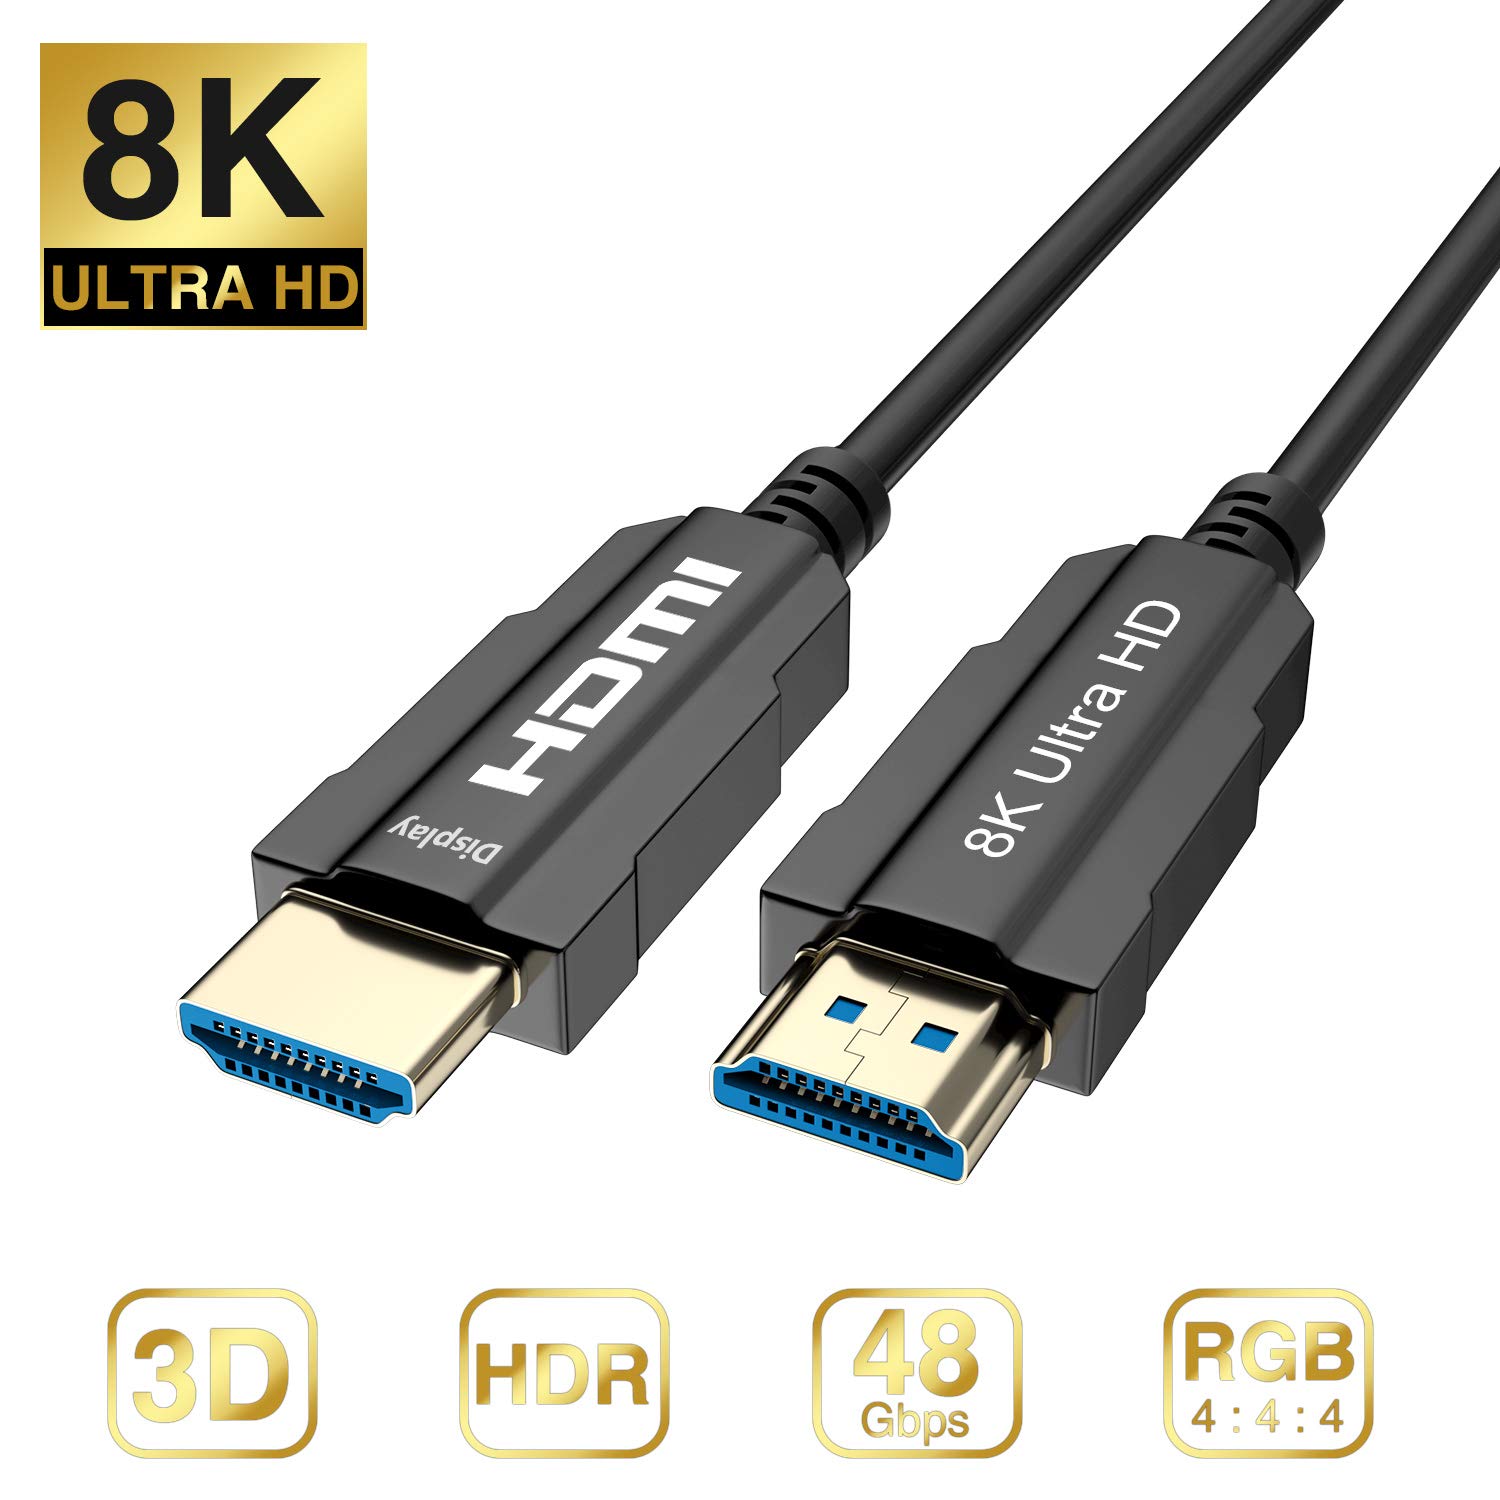 CABLEDECONN 8K HDMI 2.1 Optic Cable Real UHD HDR 8K 48Gbps,8K@60Hz 4K@120Hz HDMI Fiber 20m 65ft Support 3D HDCP2.2 HDMI Cable for PS4 SetTop Box HDTVs Projectors T0207